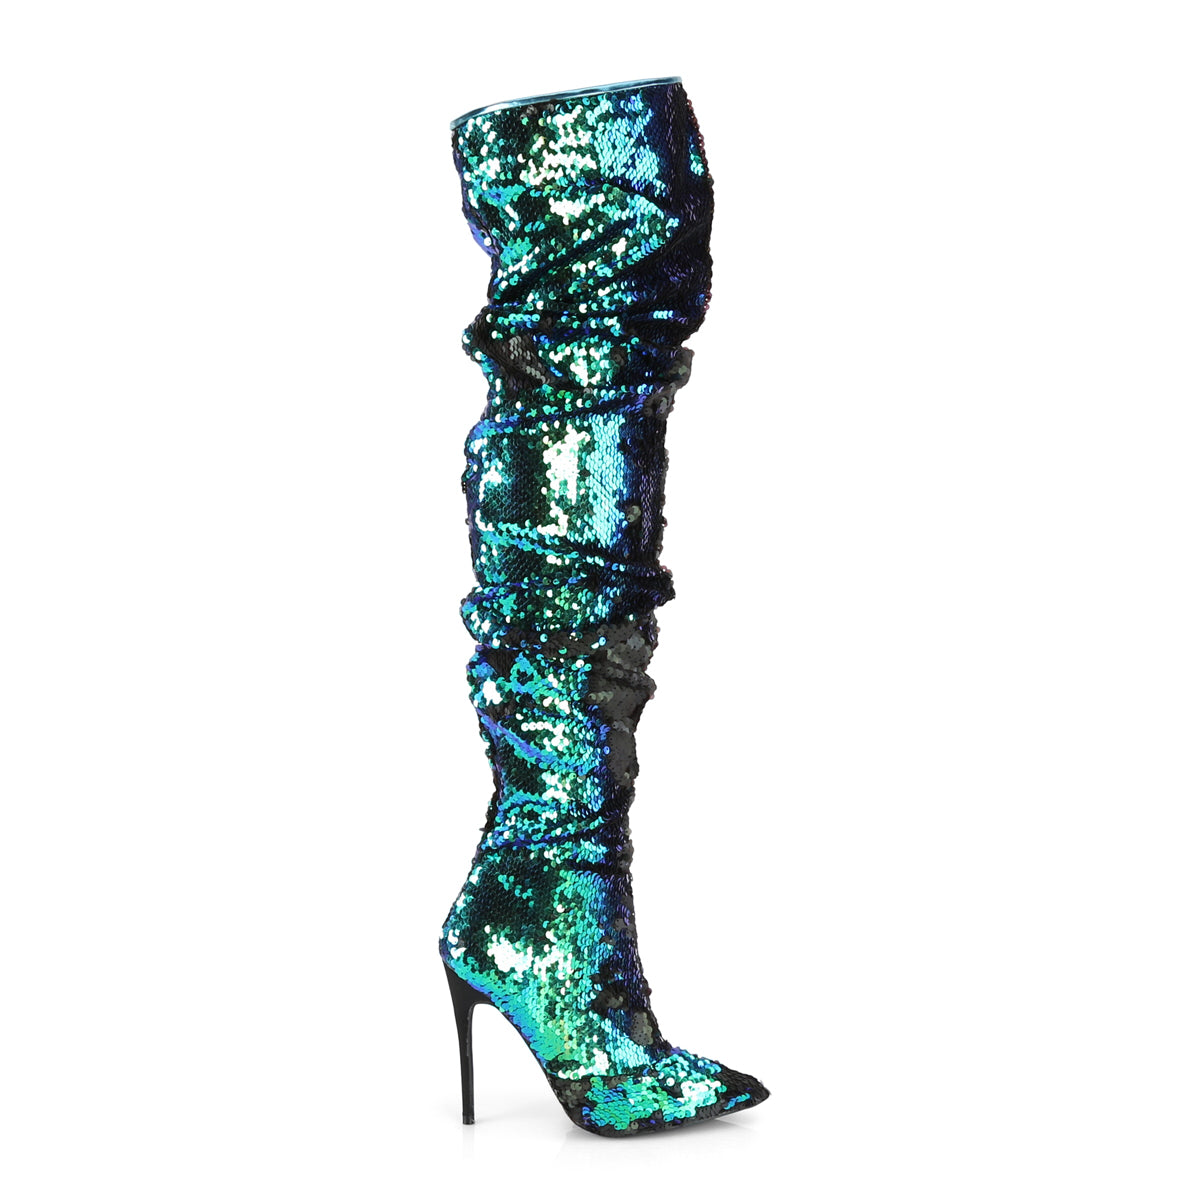 COURTLY-3011 5" Heel Green Iridescent Sequins Fetish Shoes-Pleaser- Sexy Shoes Fetish Heels